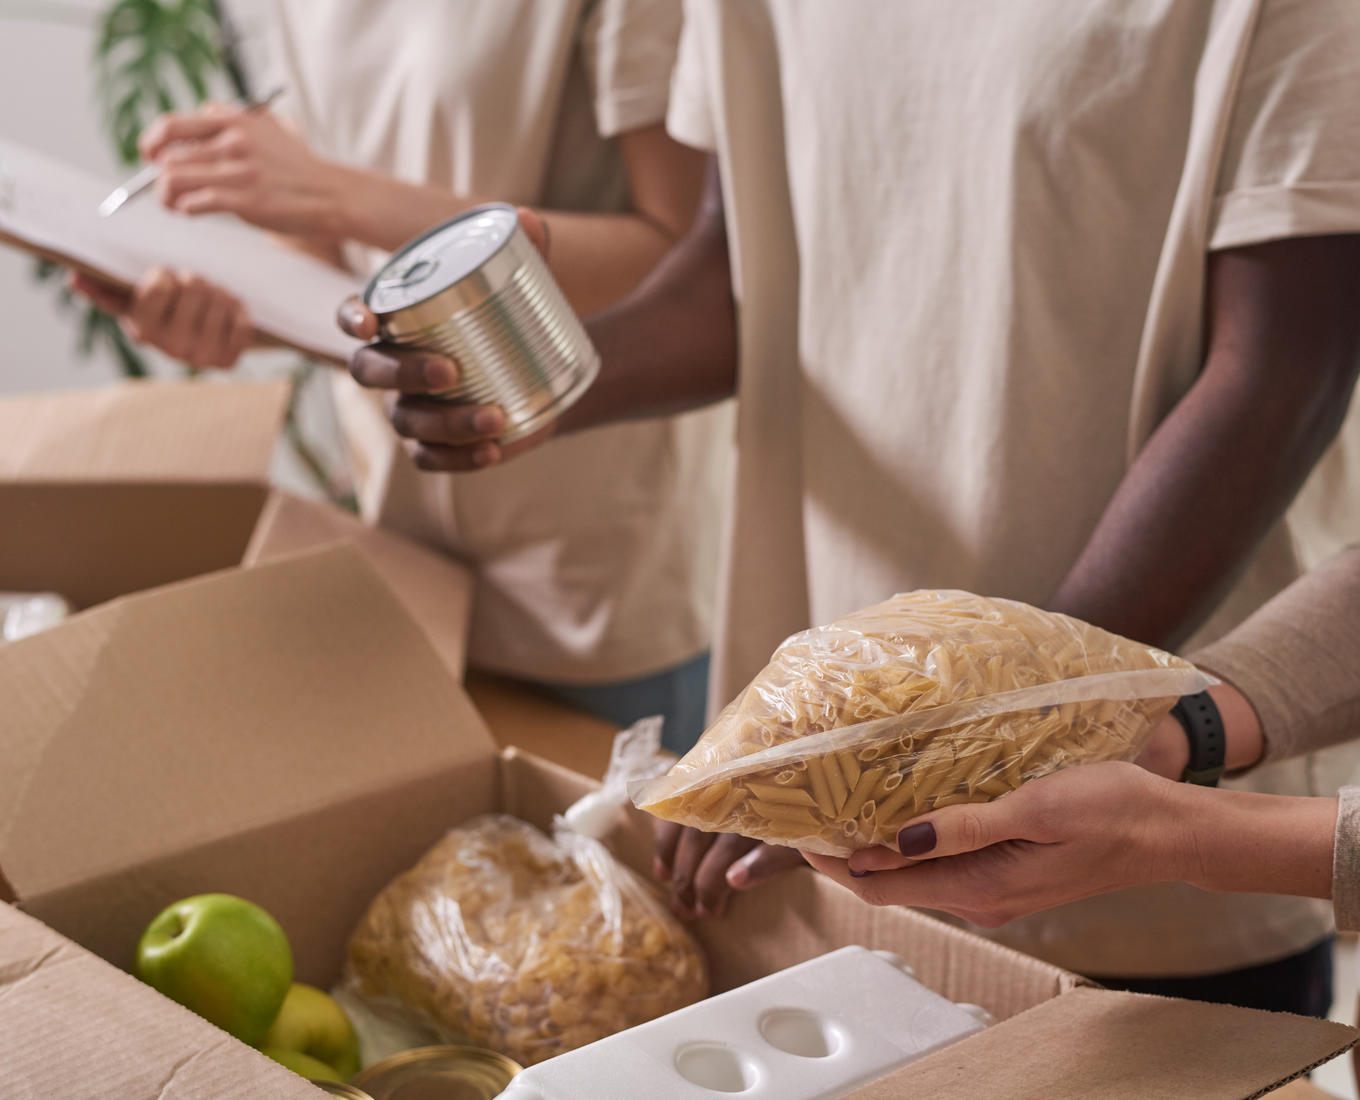 People holding nonperishable foods to put in boxes for distribution.